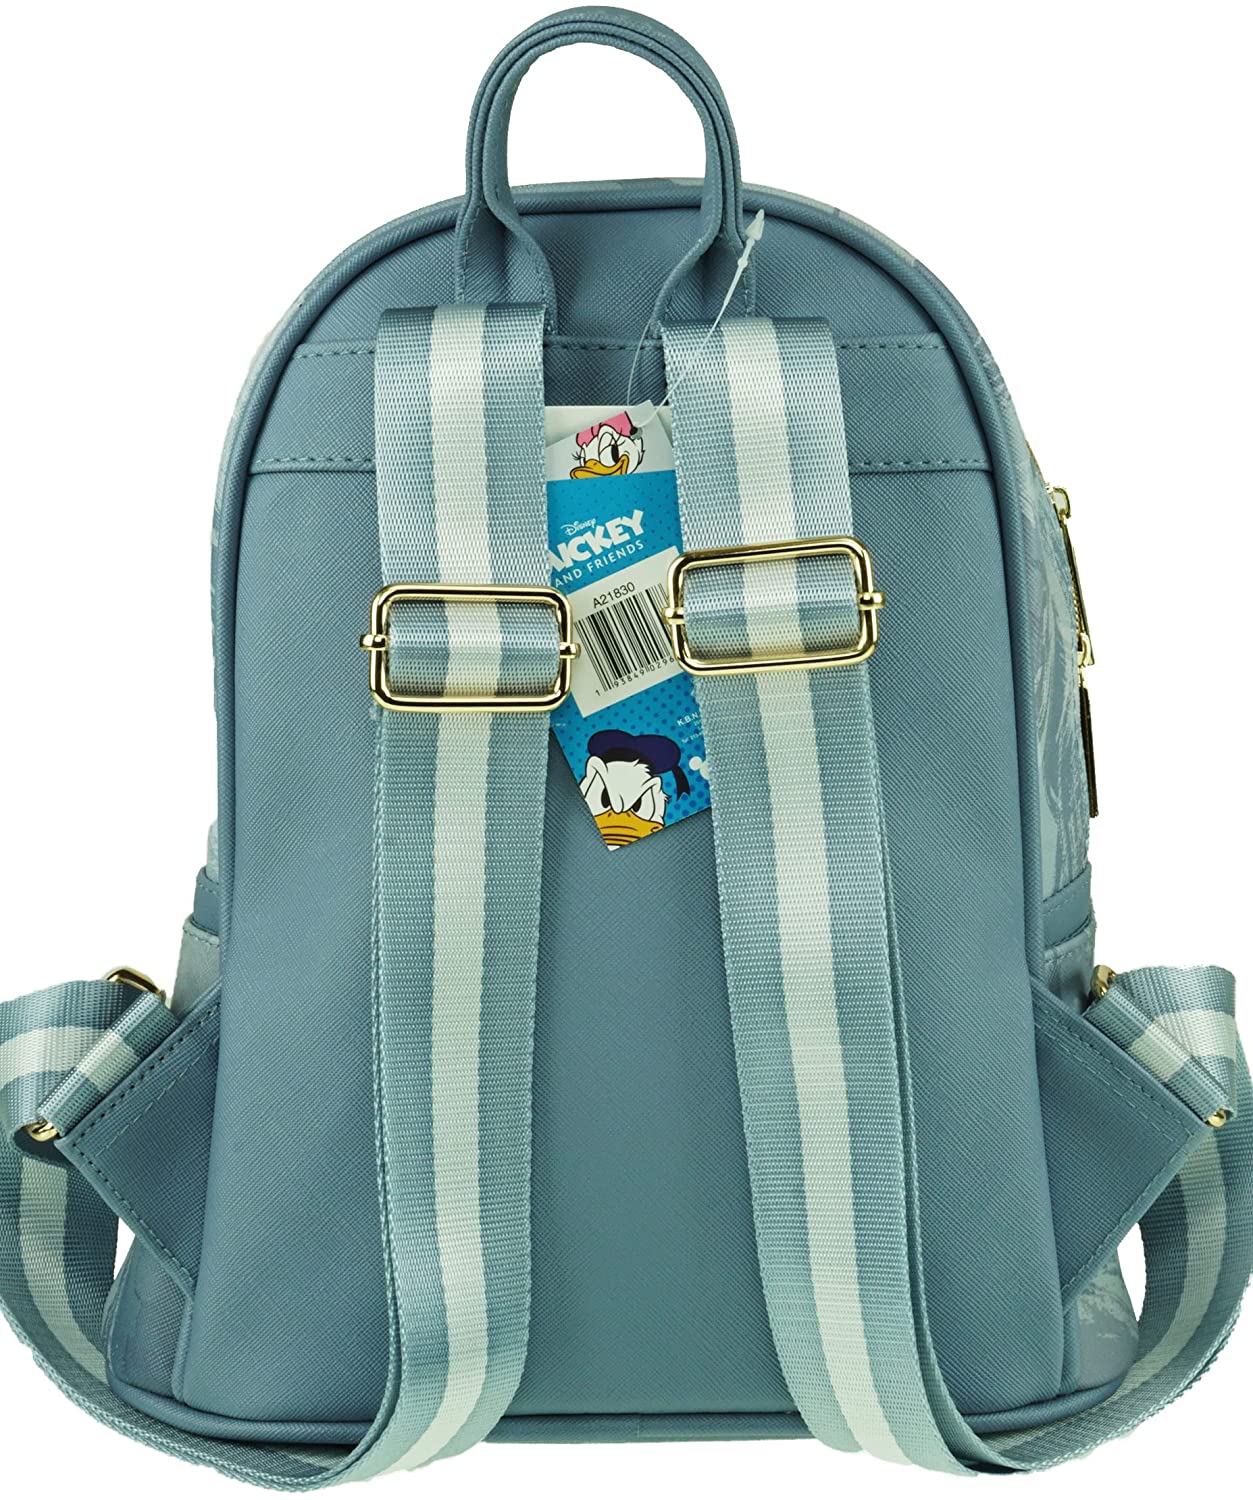 Donald Duck 11" Vegan Leather Mini Backpack - A21830 - GTE Zone